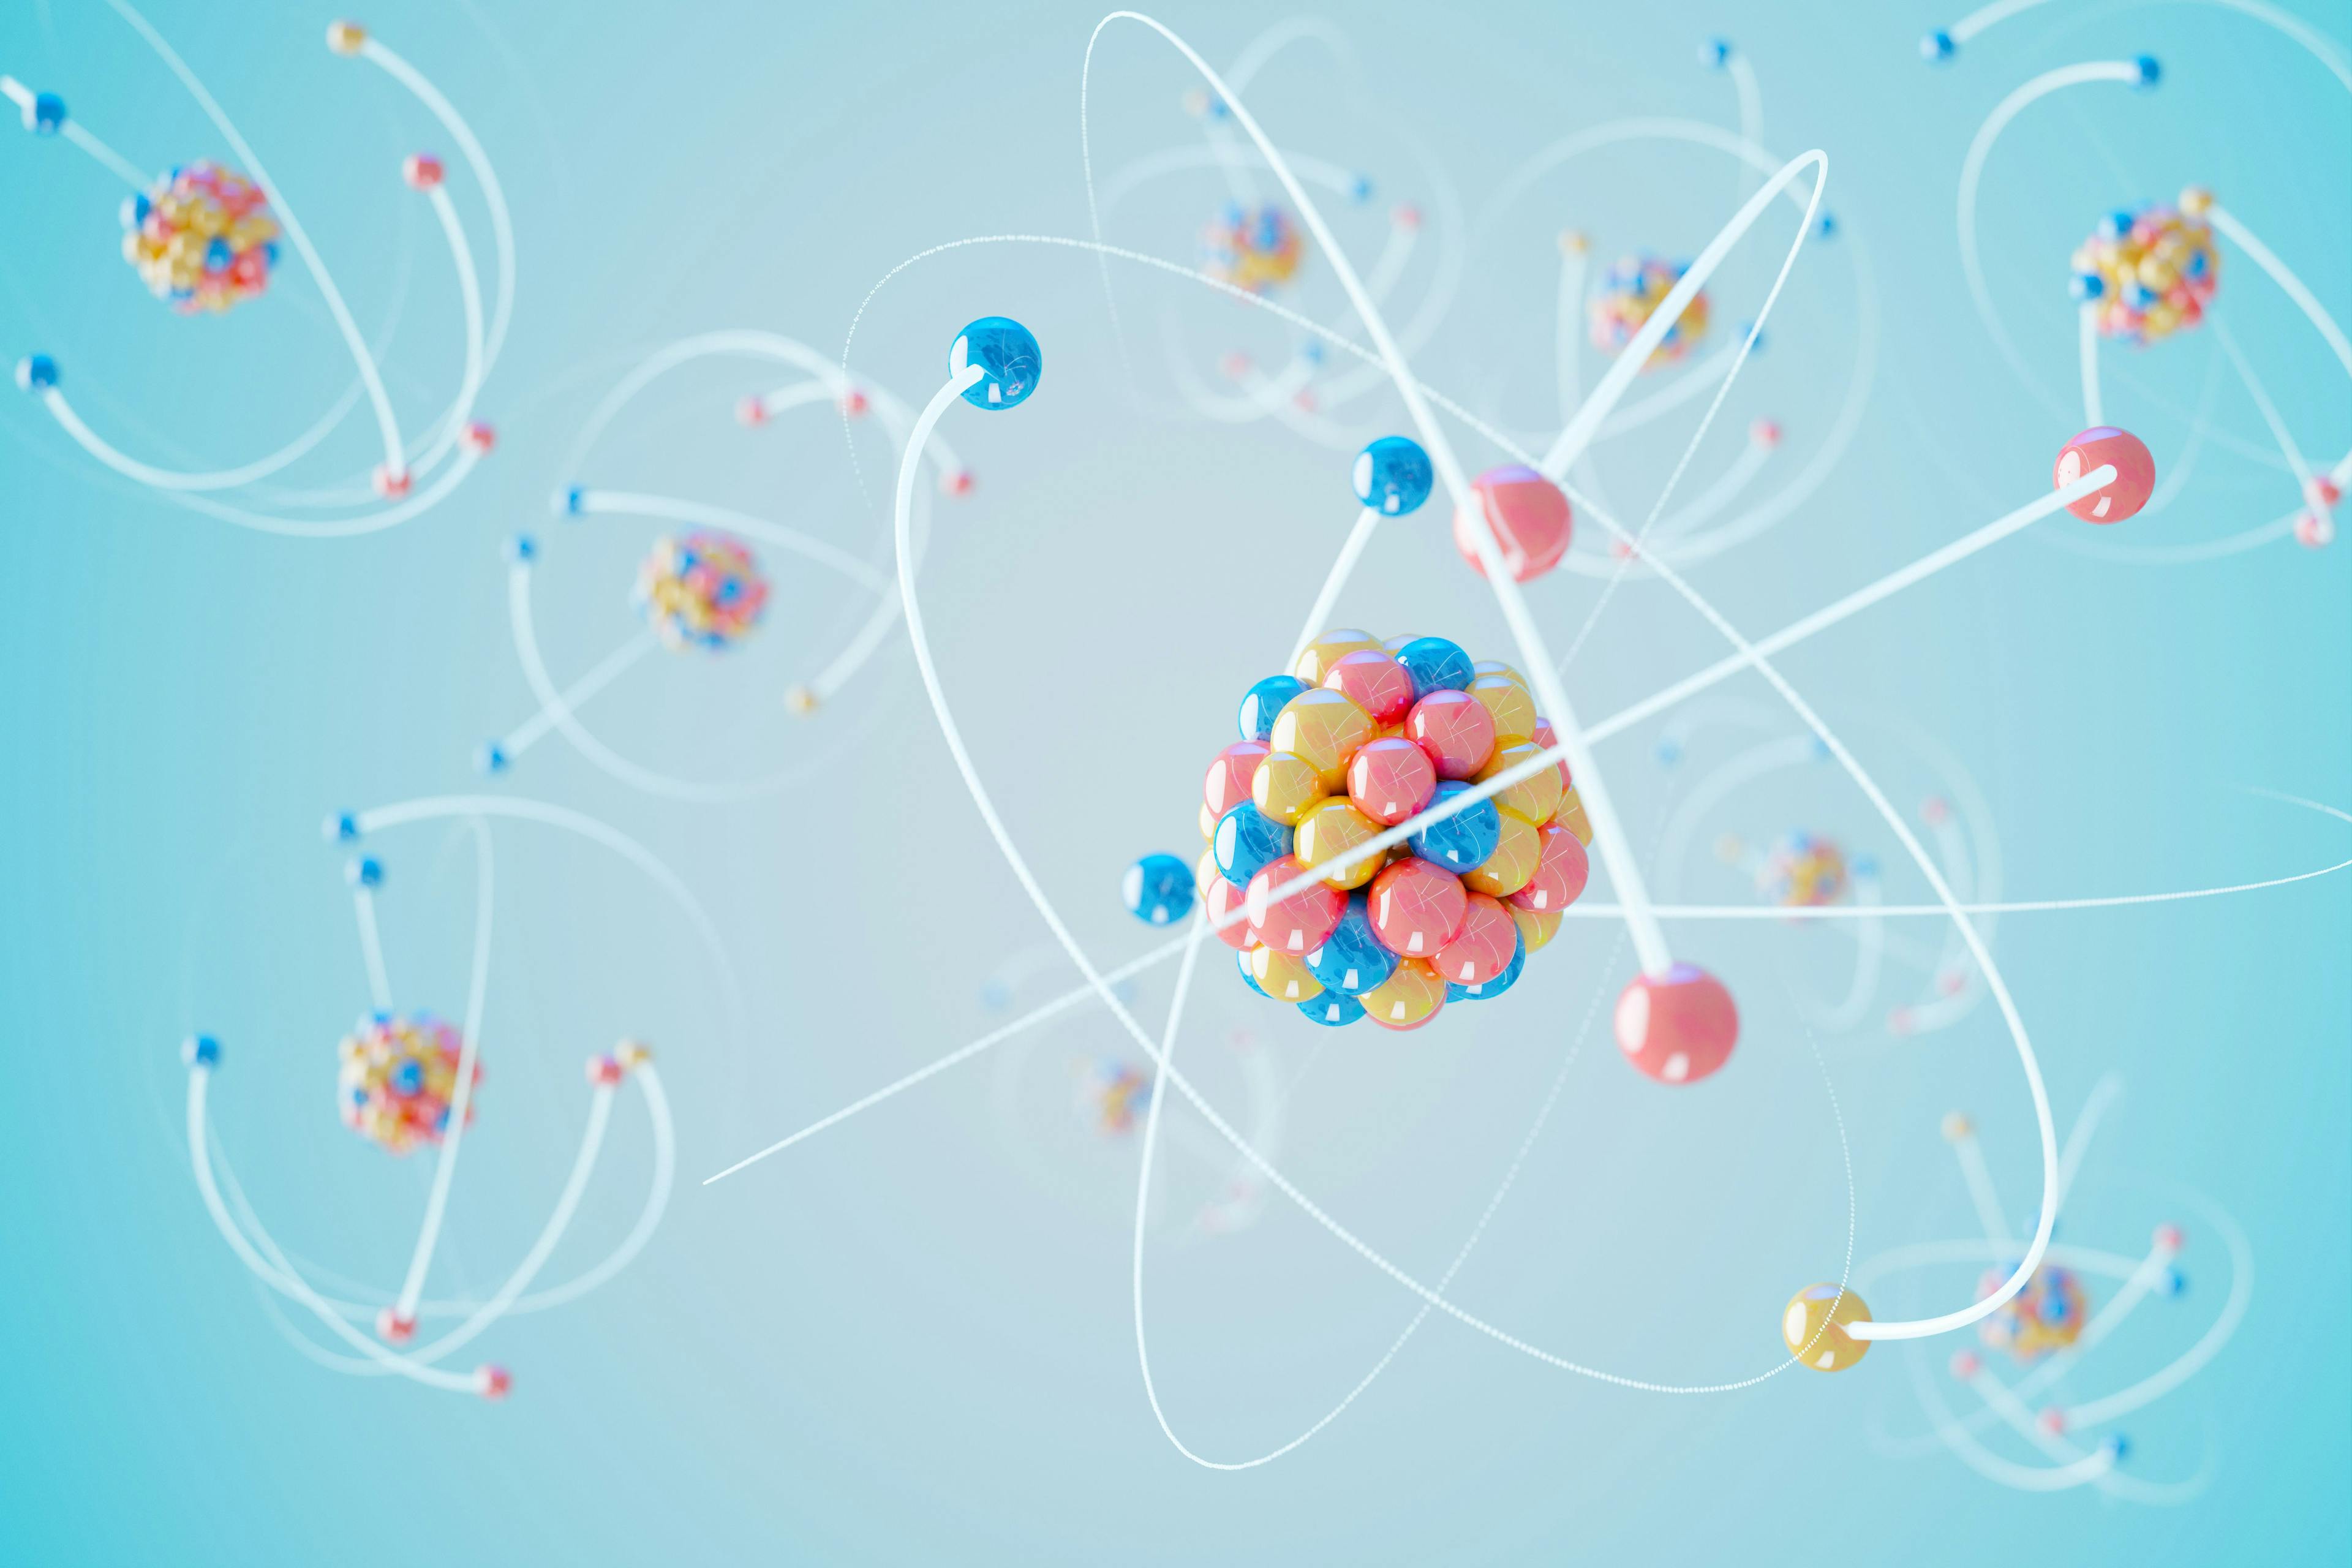 3D rendering of an atom model with shiny particles orbiting around the nucleus | Image Credit: © Dabarti - stock.adobe.com